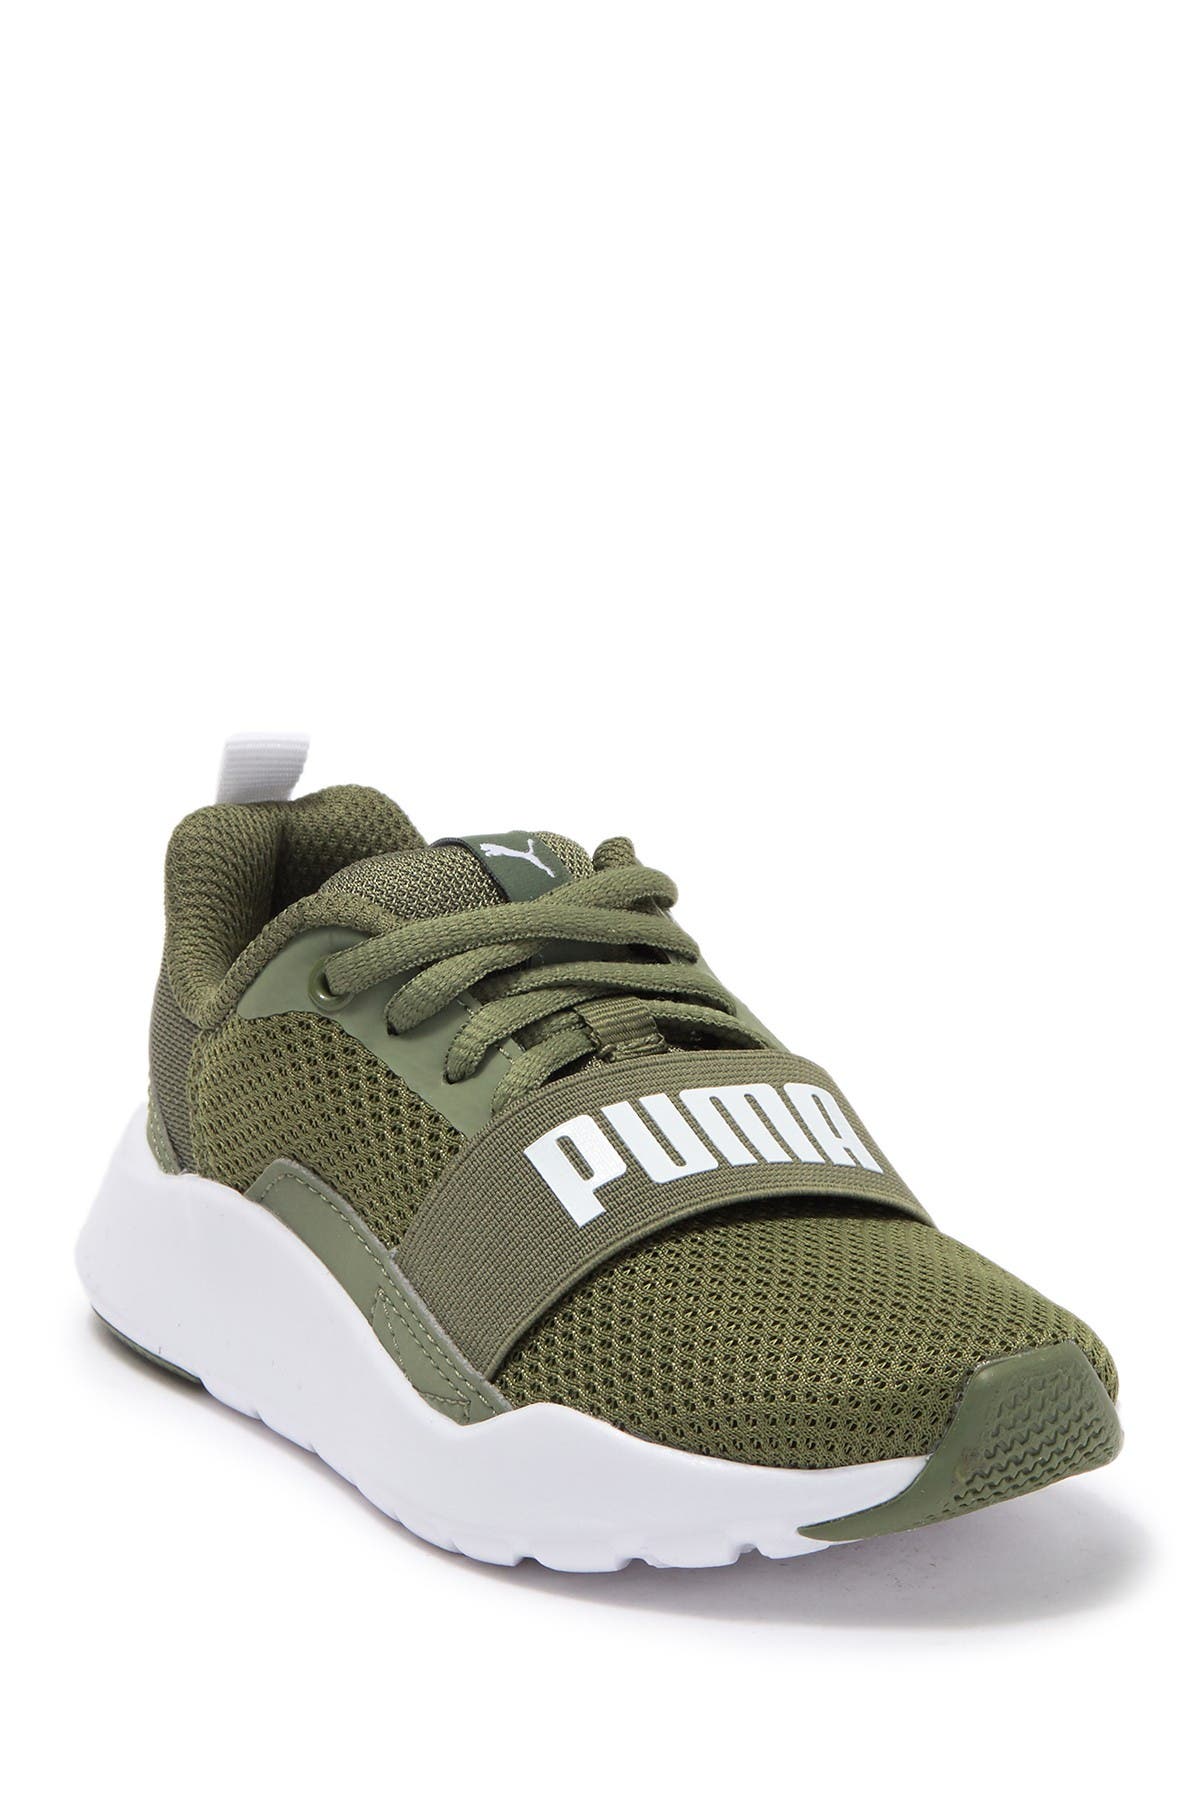 PUMA | Wired PS Sneaker | Nordstrom Rack